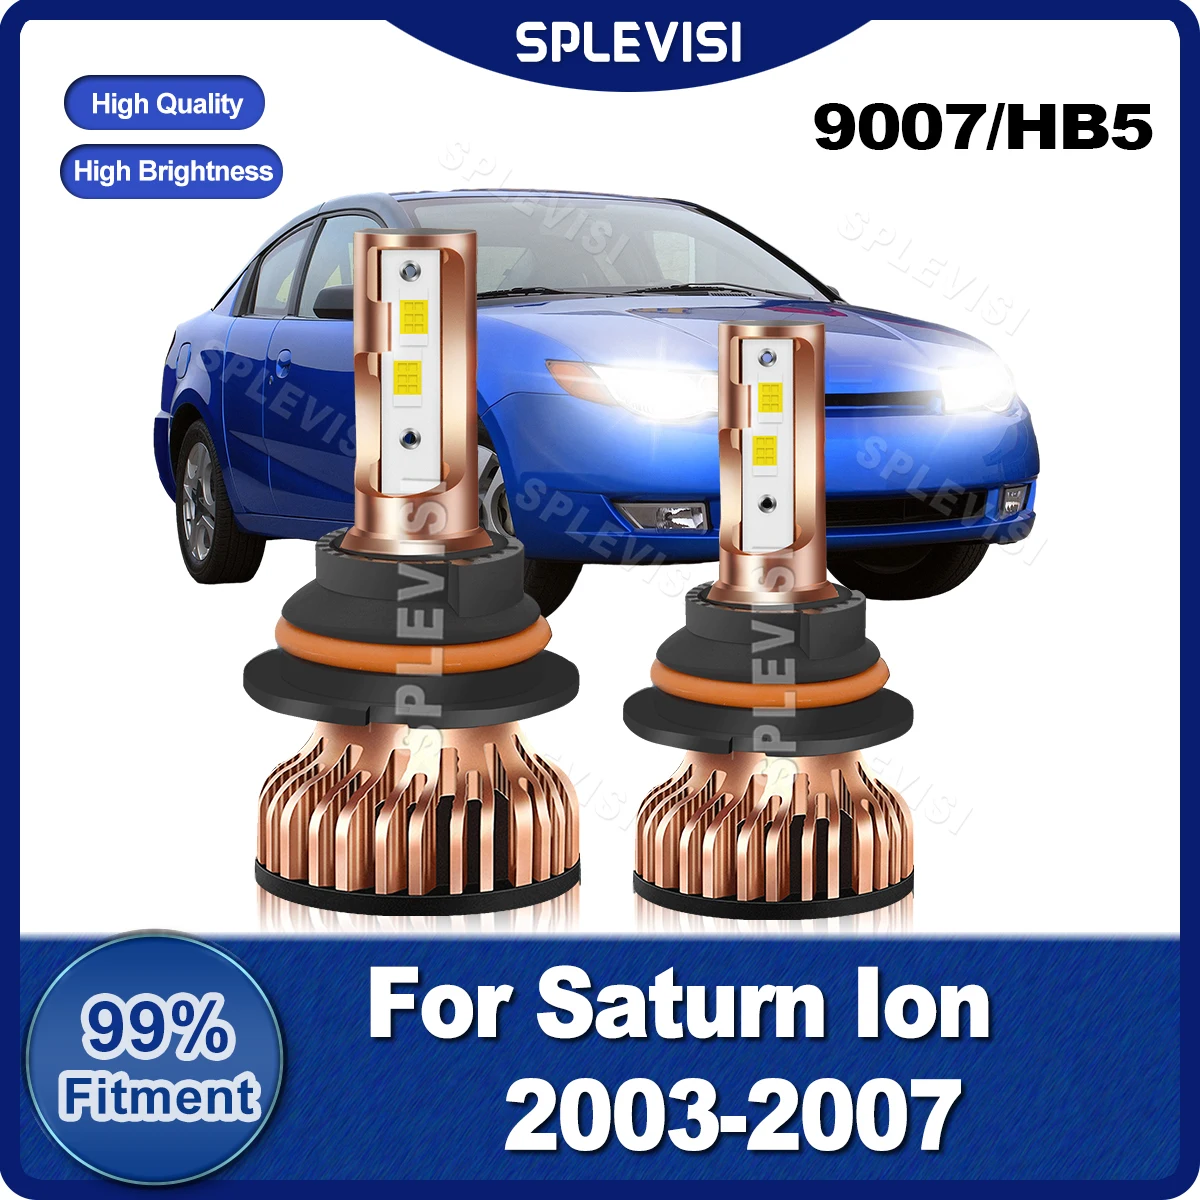 

SPLEVISI 9007/HB5 LED Headlight High Low Beam Bulbs 300W 30000LM/Pair 9V-24V For Saturn Ion 2003 2004 2005 2006 2007 Pure White